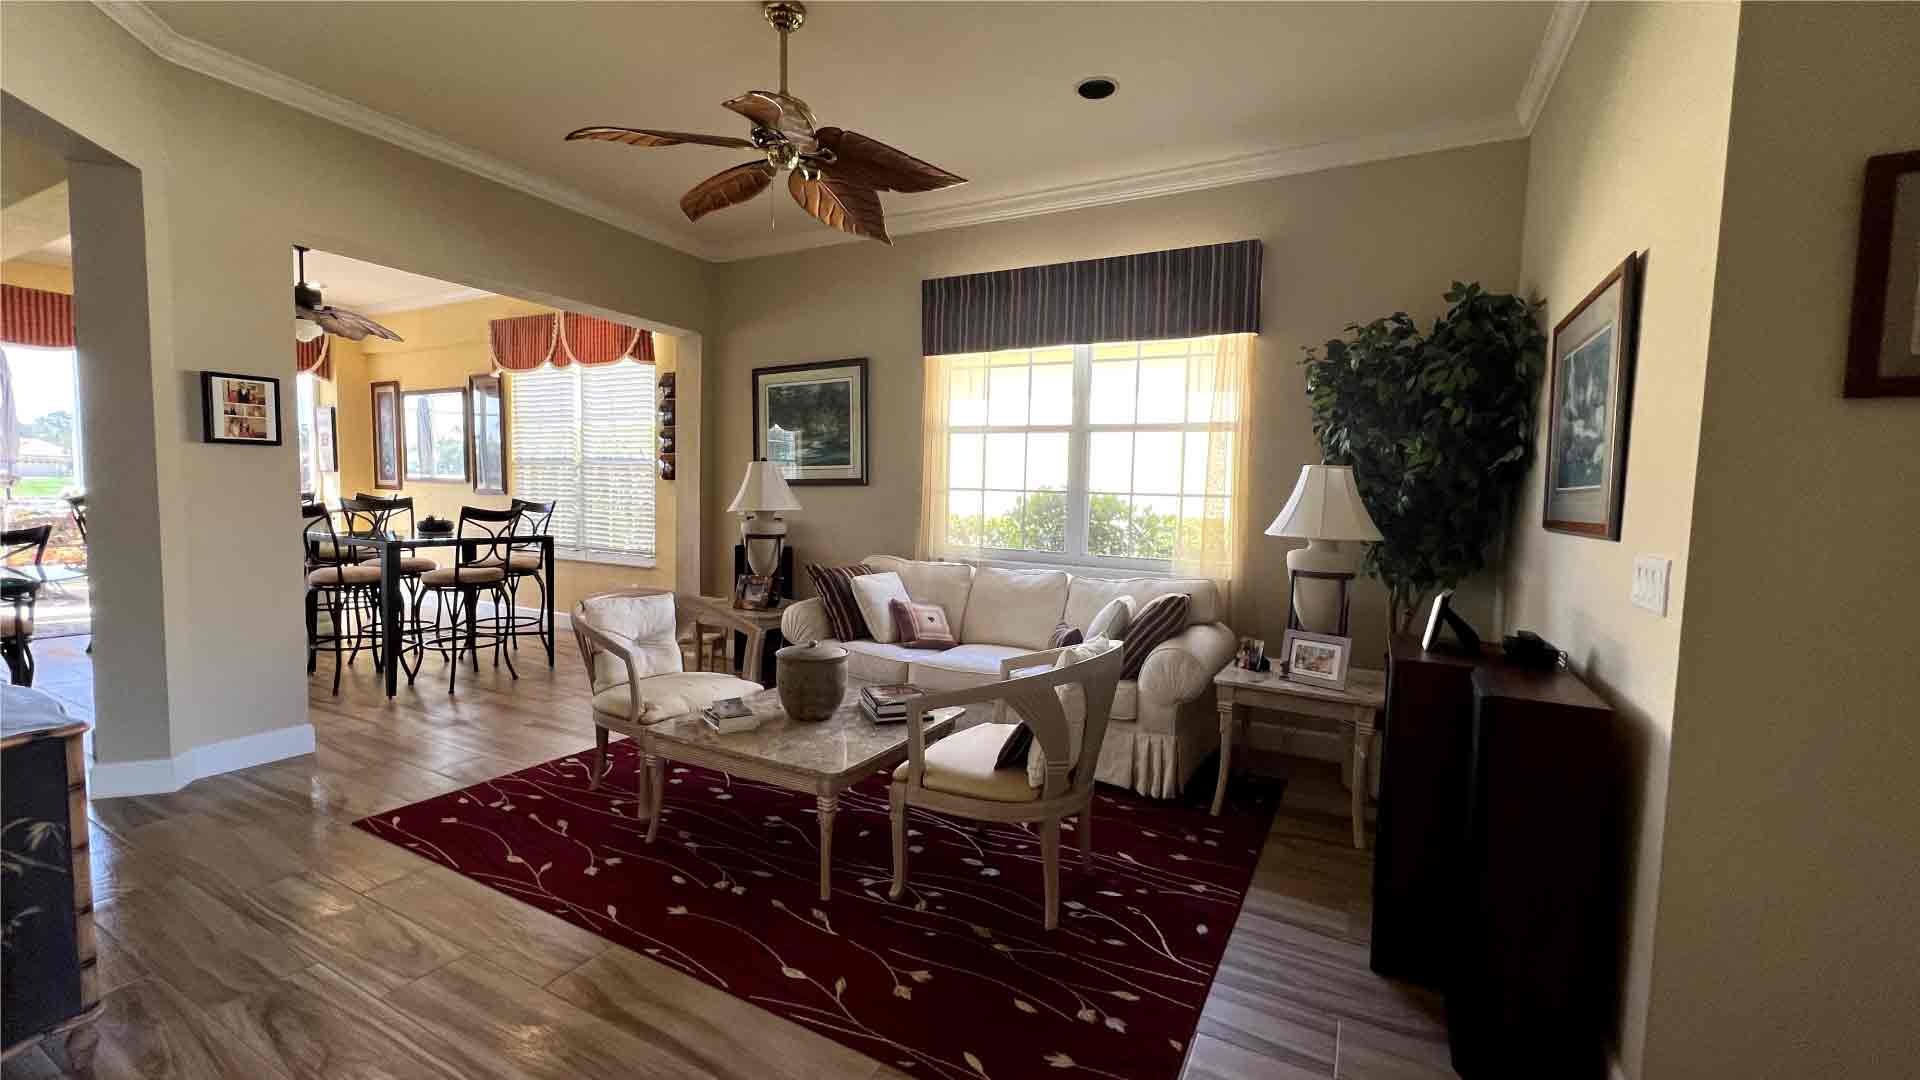 Living room - Regular cleaning in Cape Coral by Goldmillio - Apr 18 